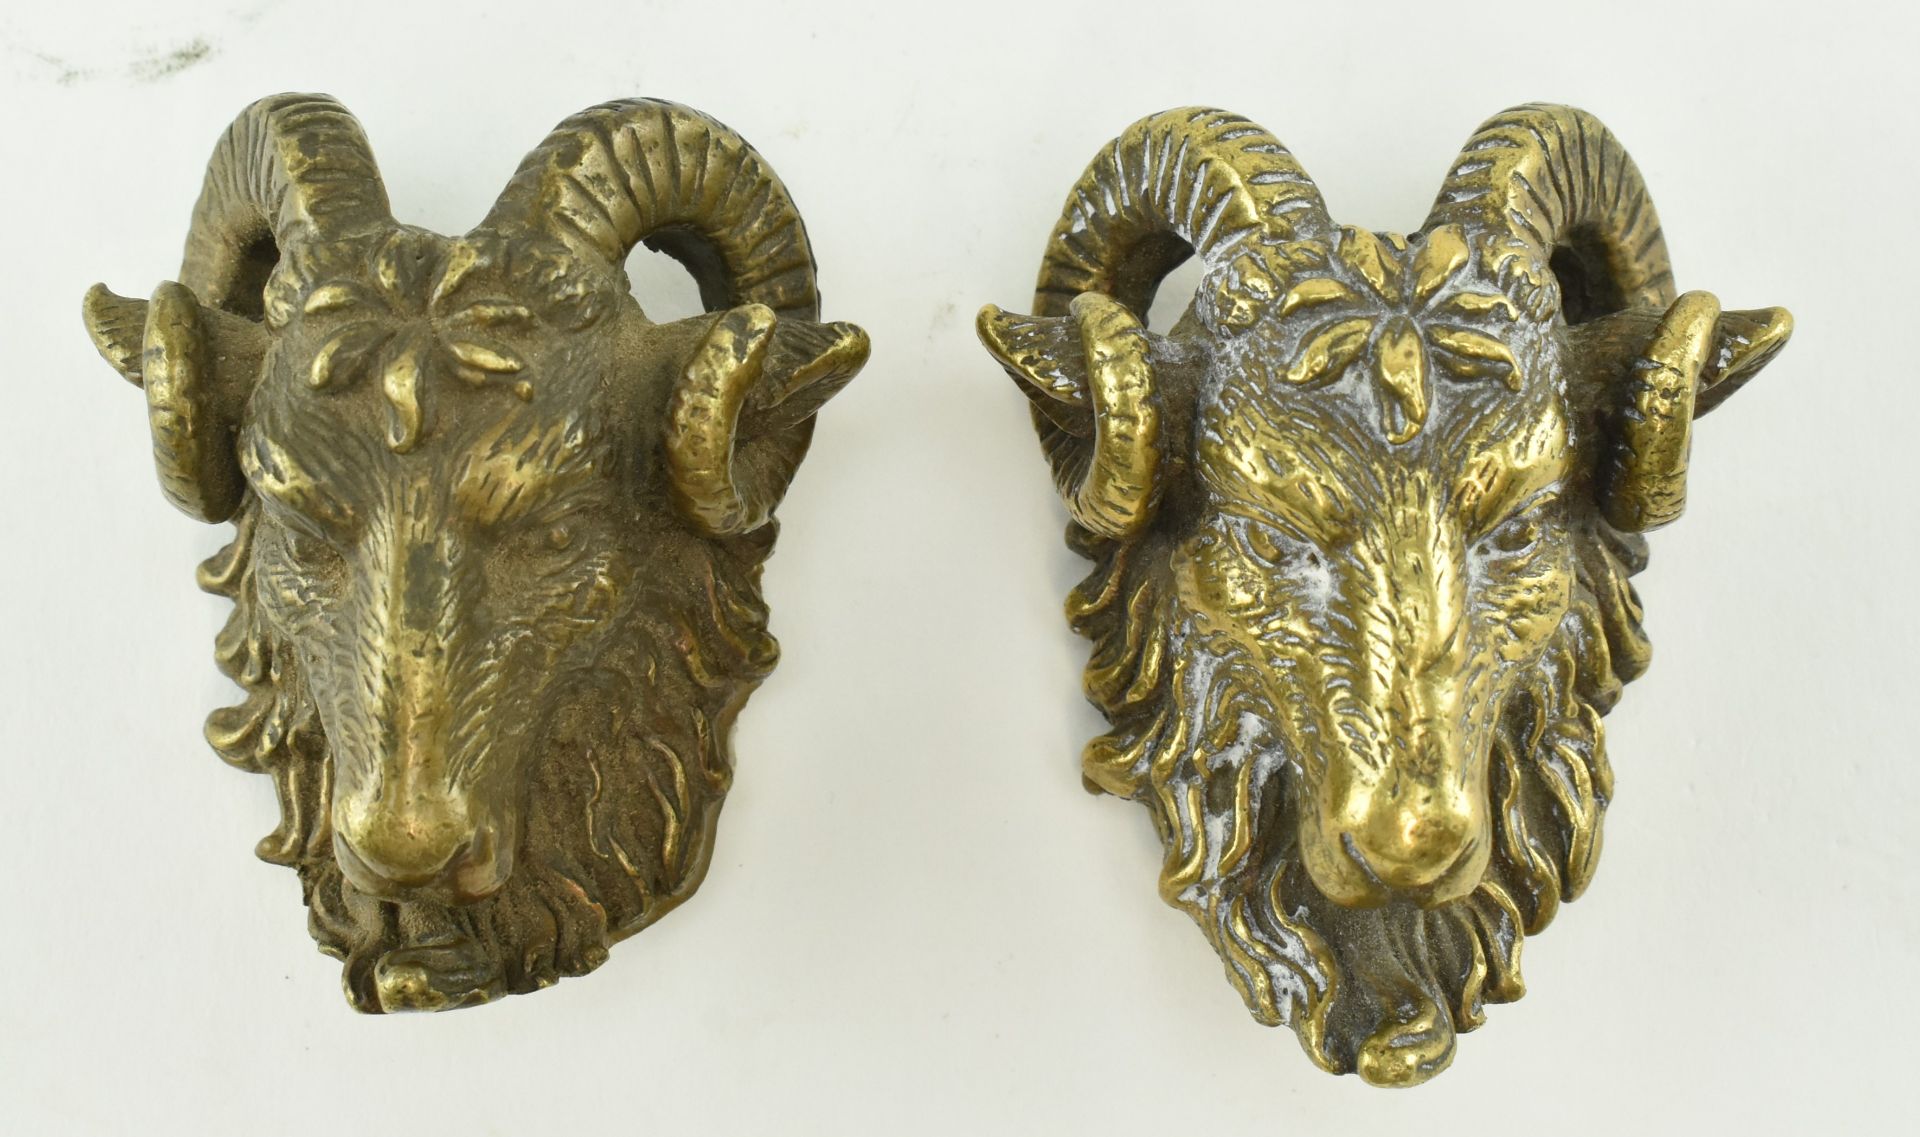 COLLECTION OF THREE BRONZE MODELLED HEADS OF RAMS - Image 4 of 5